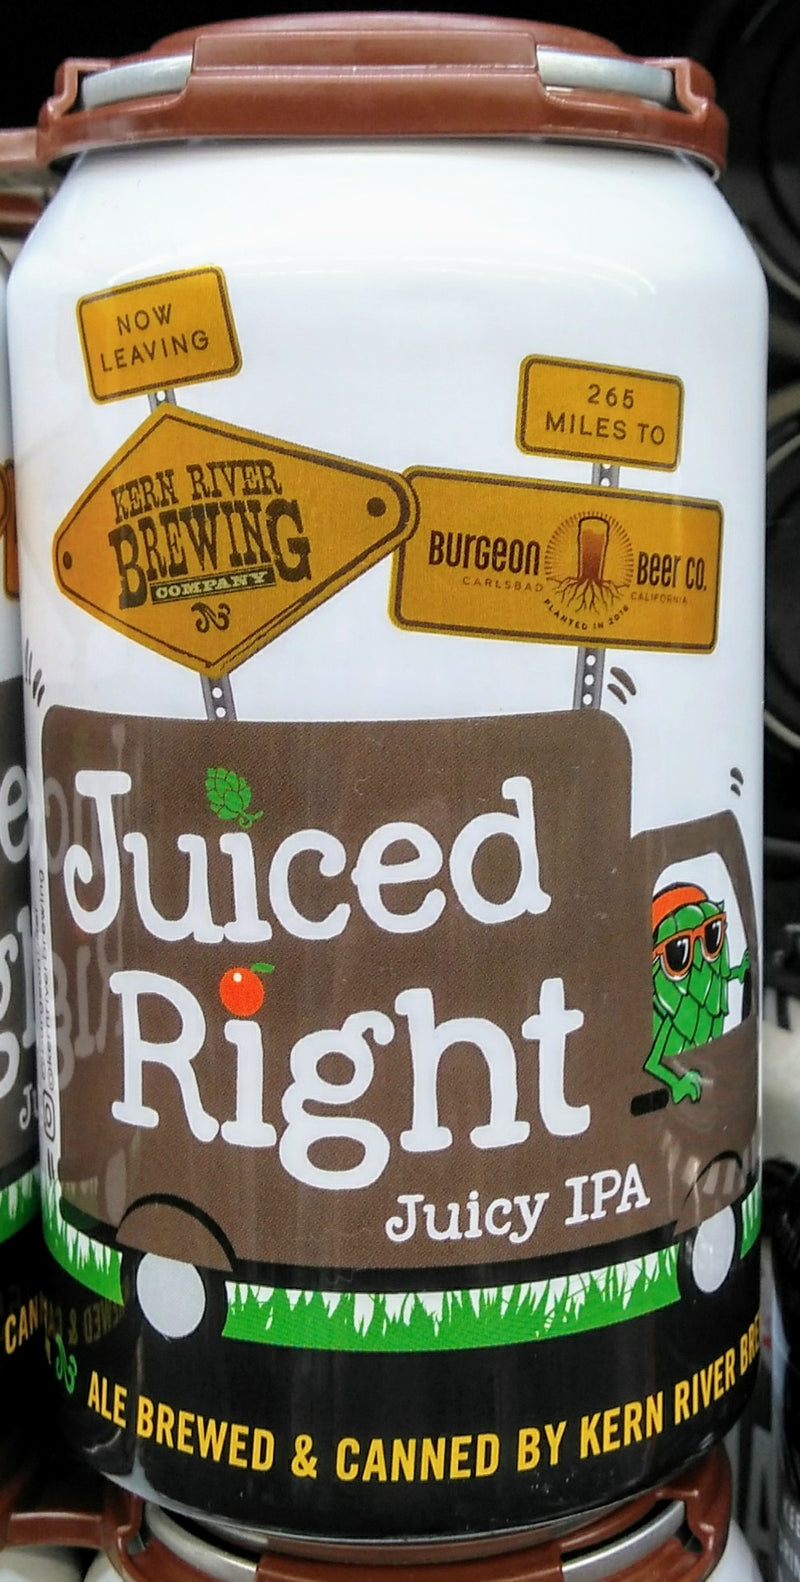 KERN RIVER BREWING JUICED RIGHT JUICY IPA 12oz can